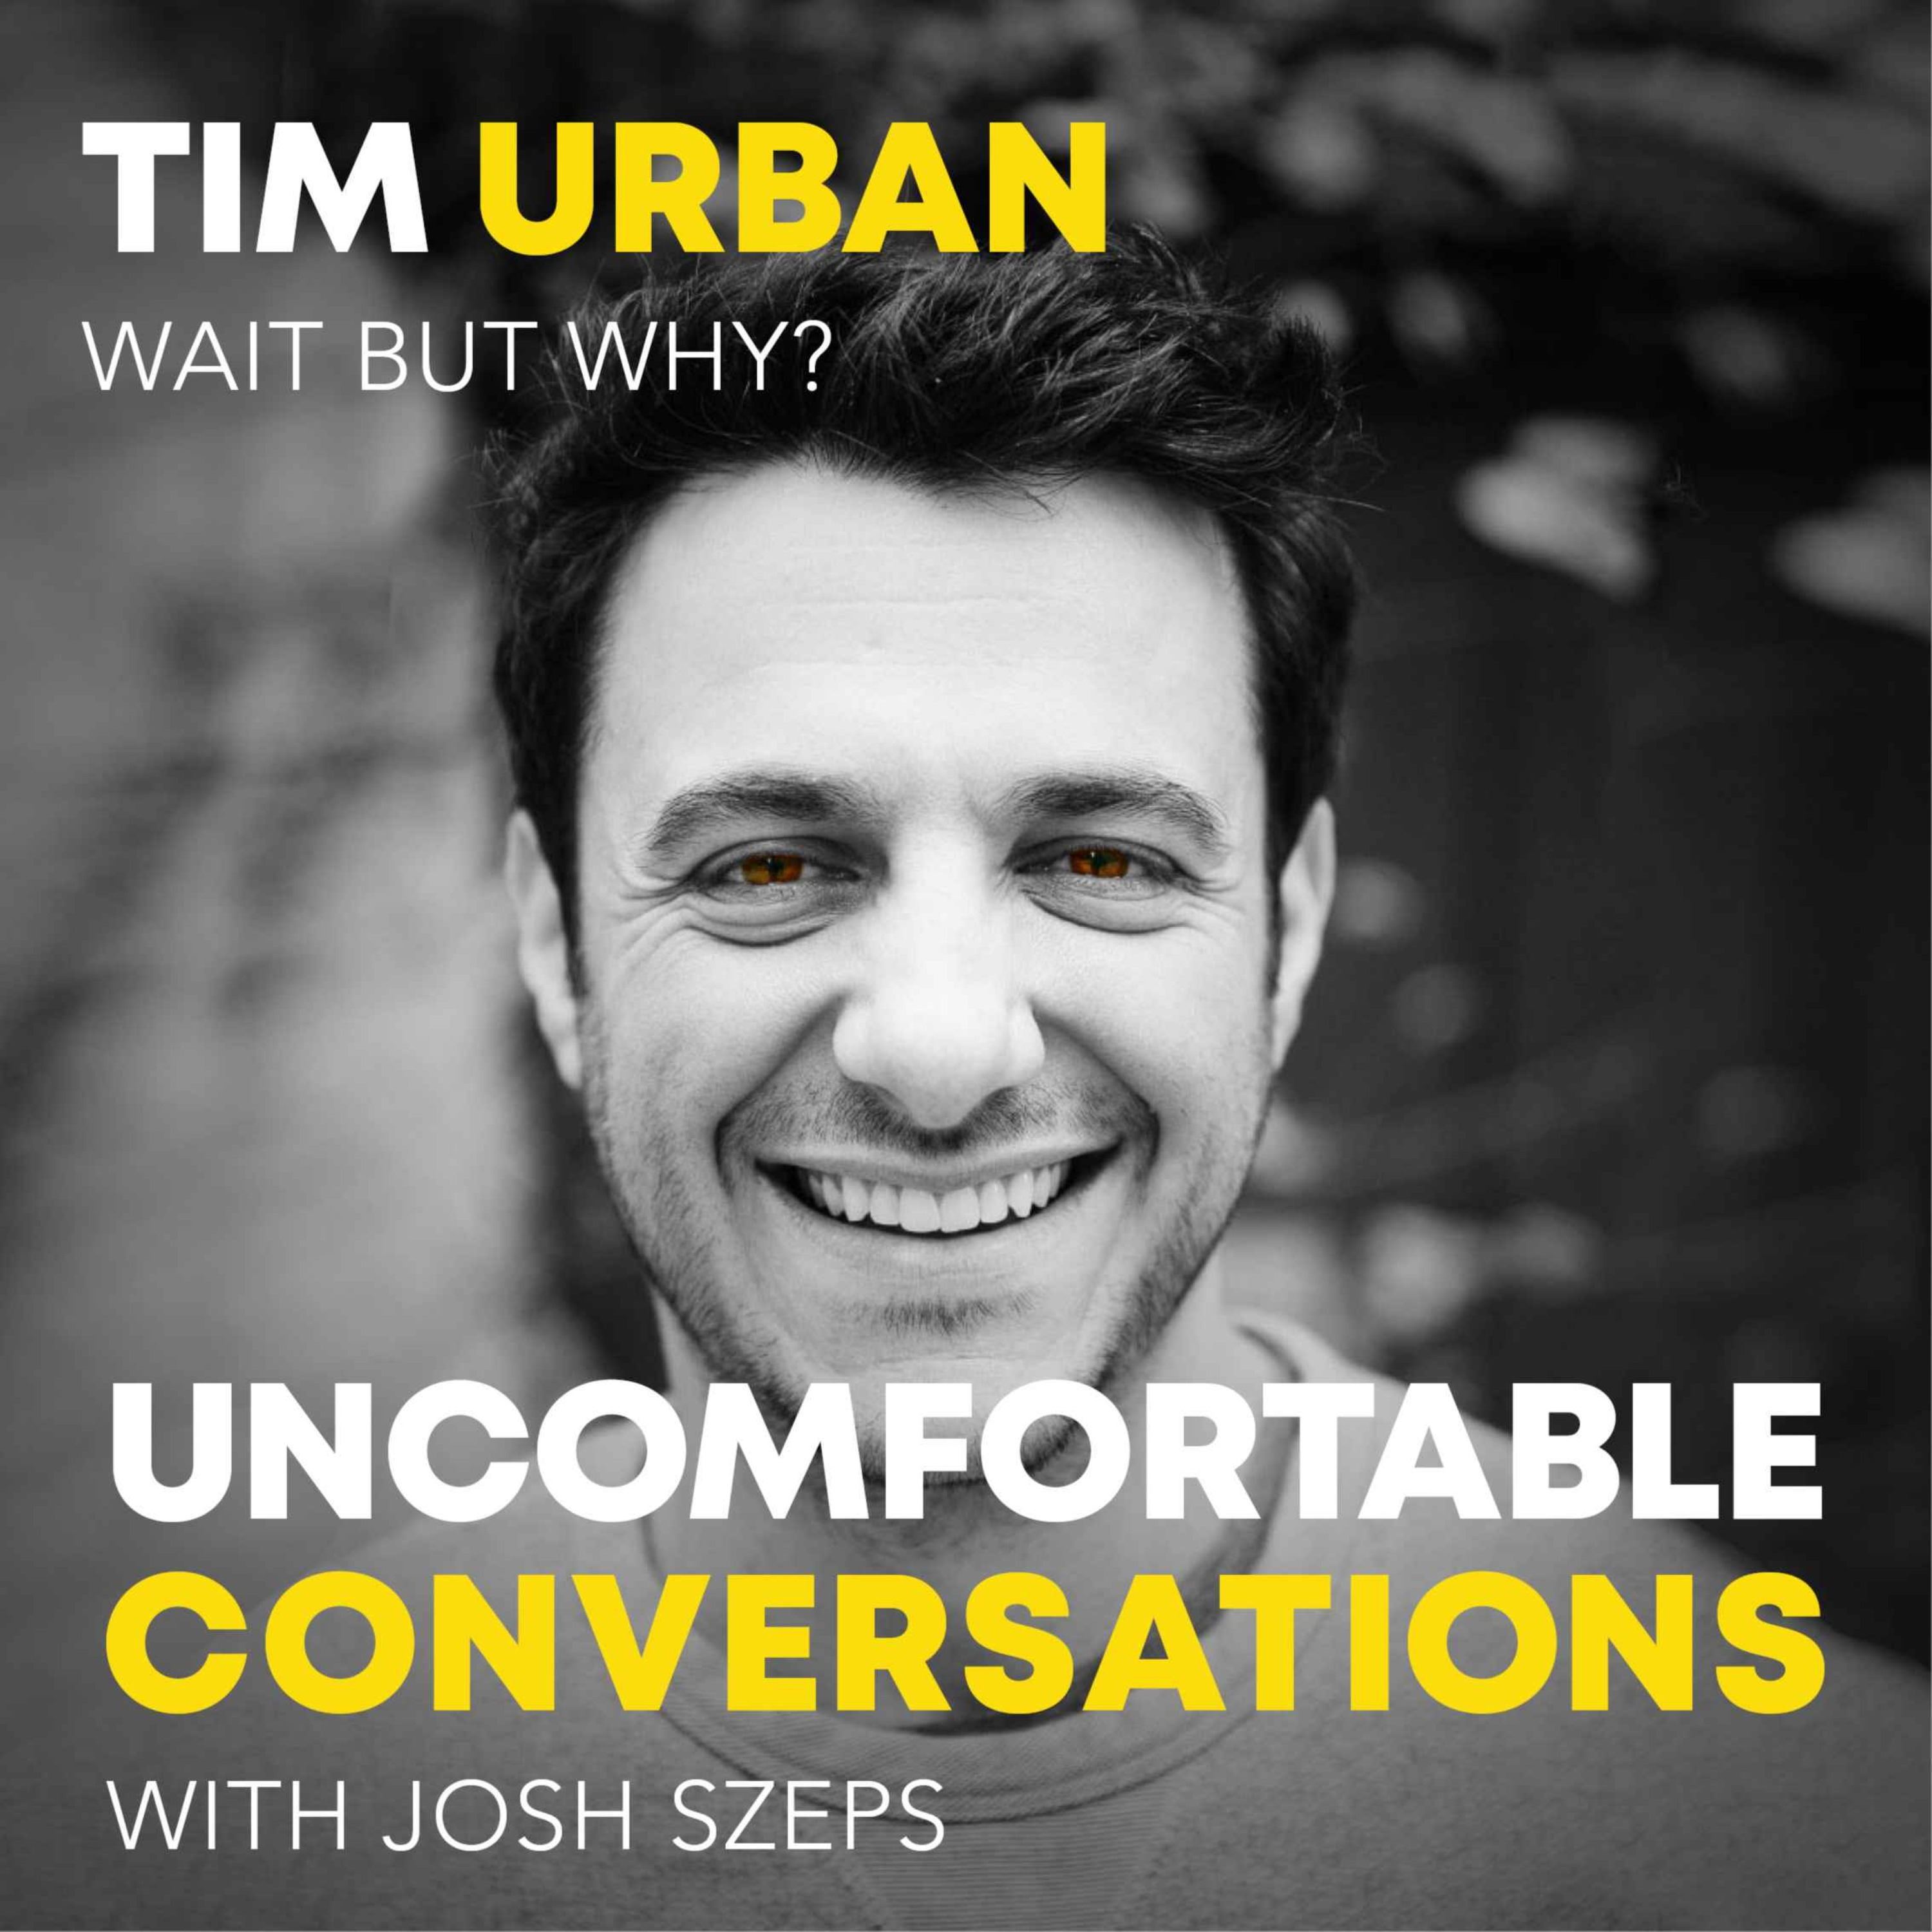 "Wait But Why?" with Tim Urban